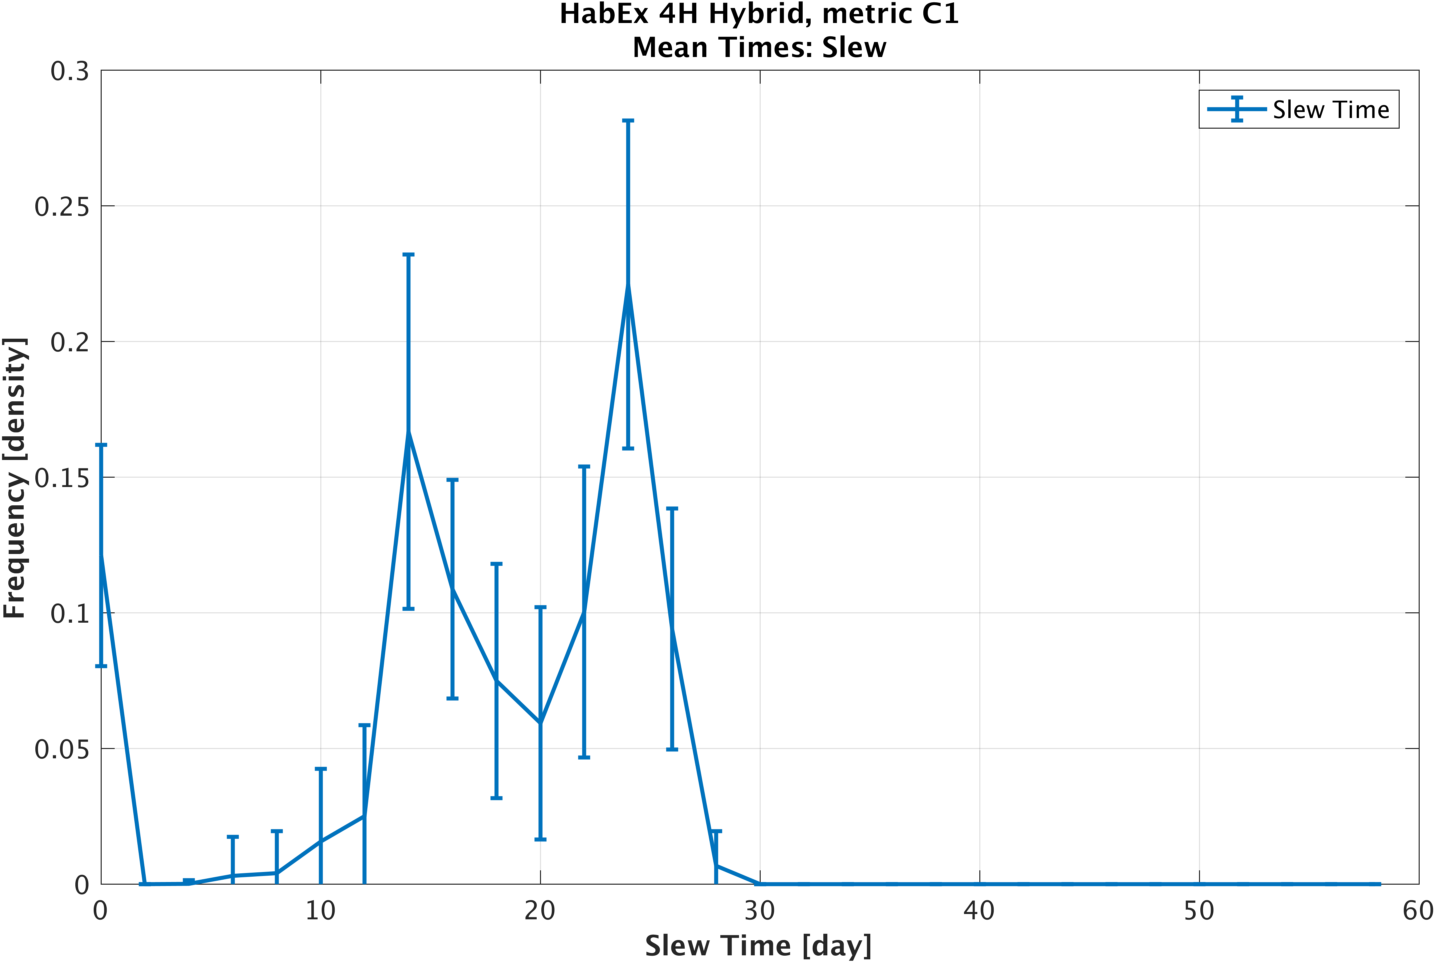 Mean slew time histogram (60 days)